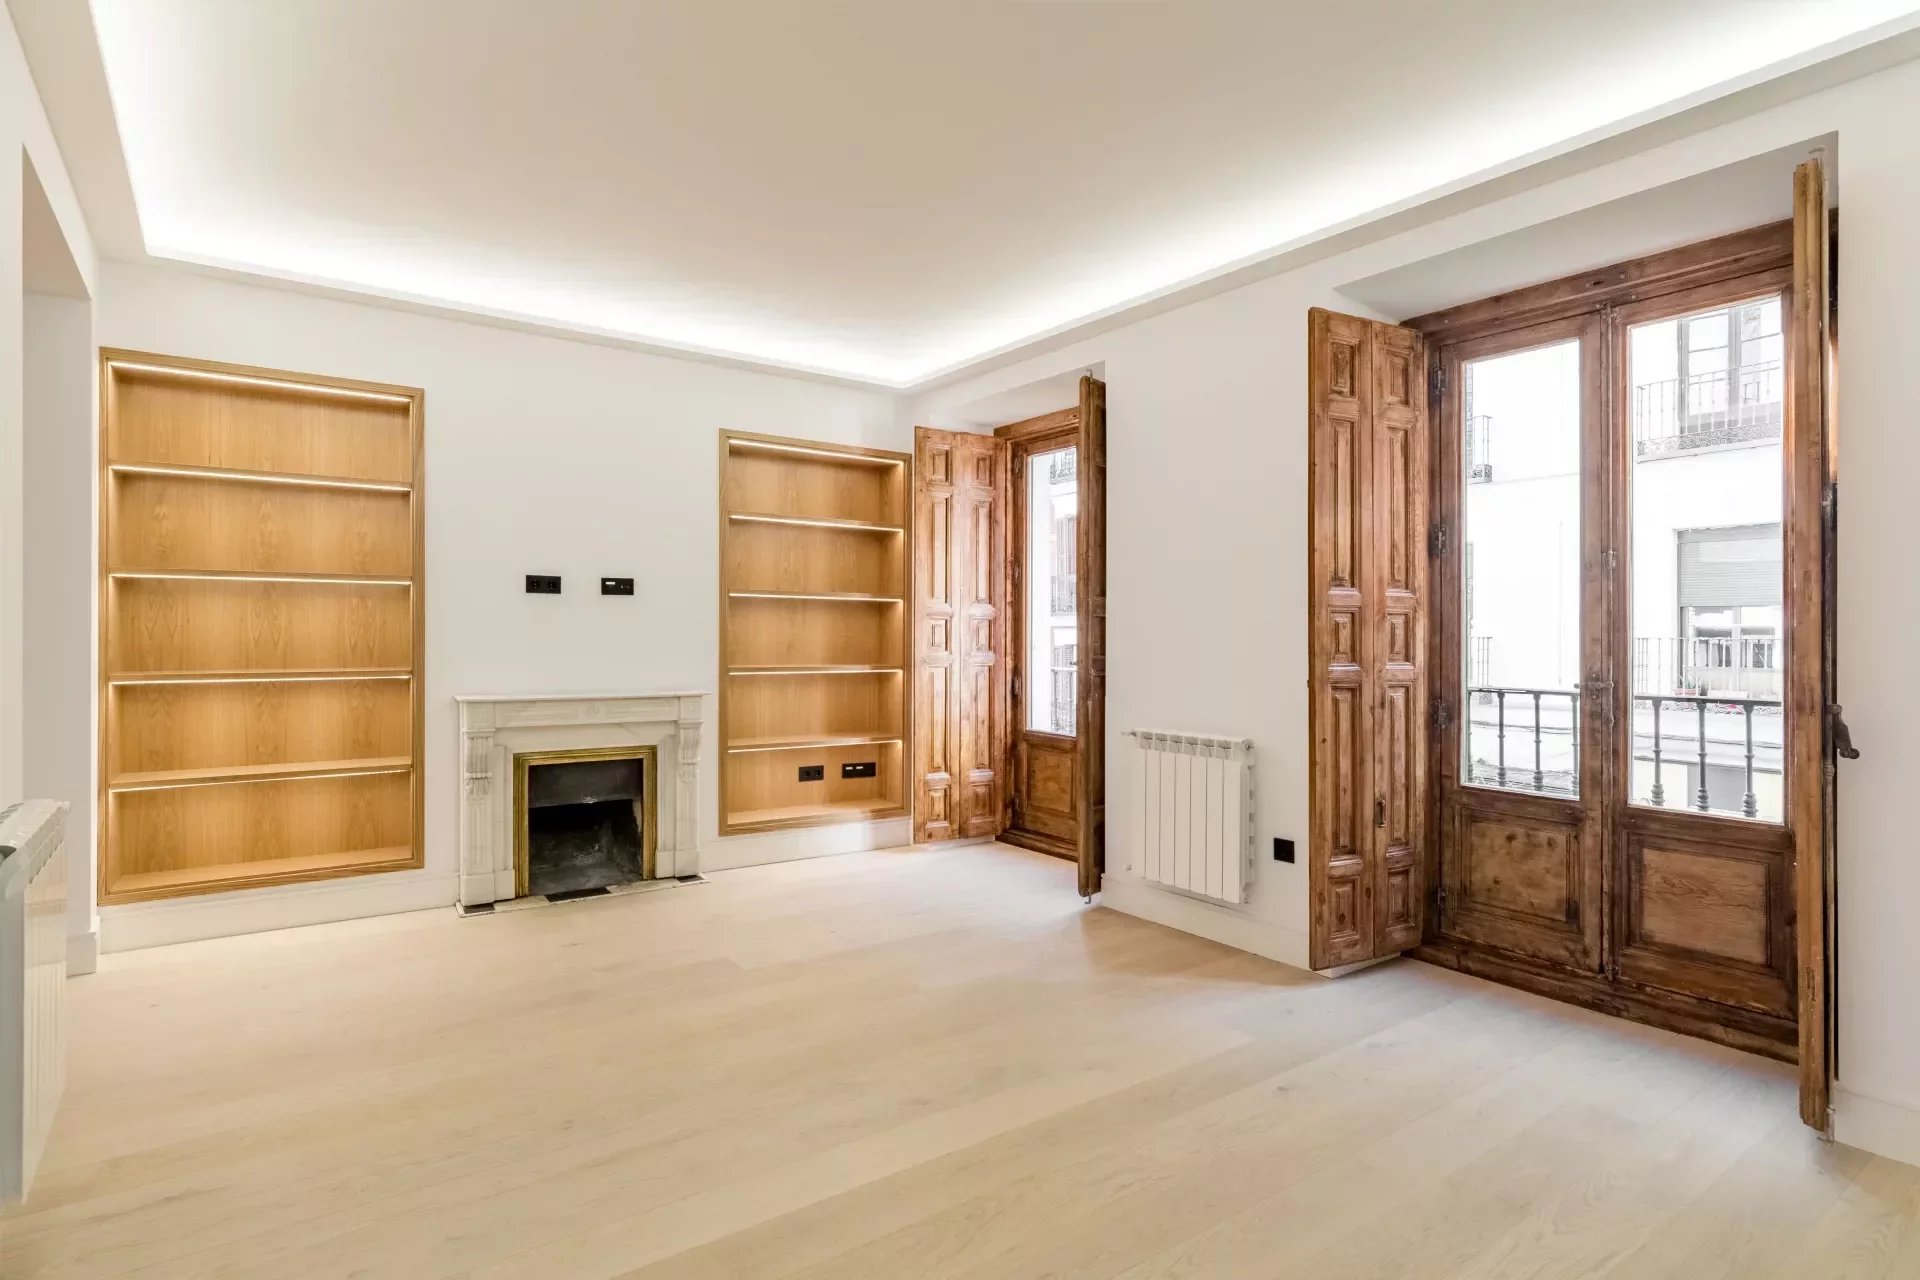 Flat for sale in Chueca-Justicia